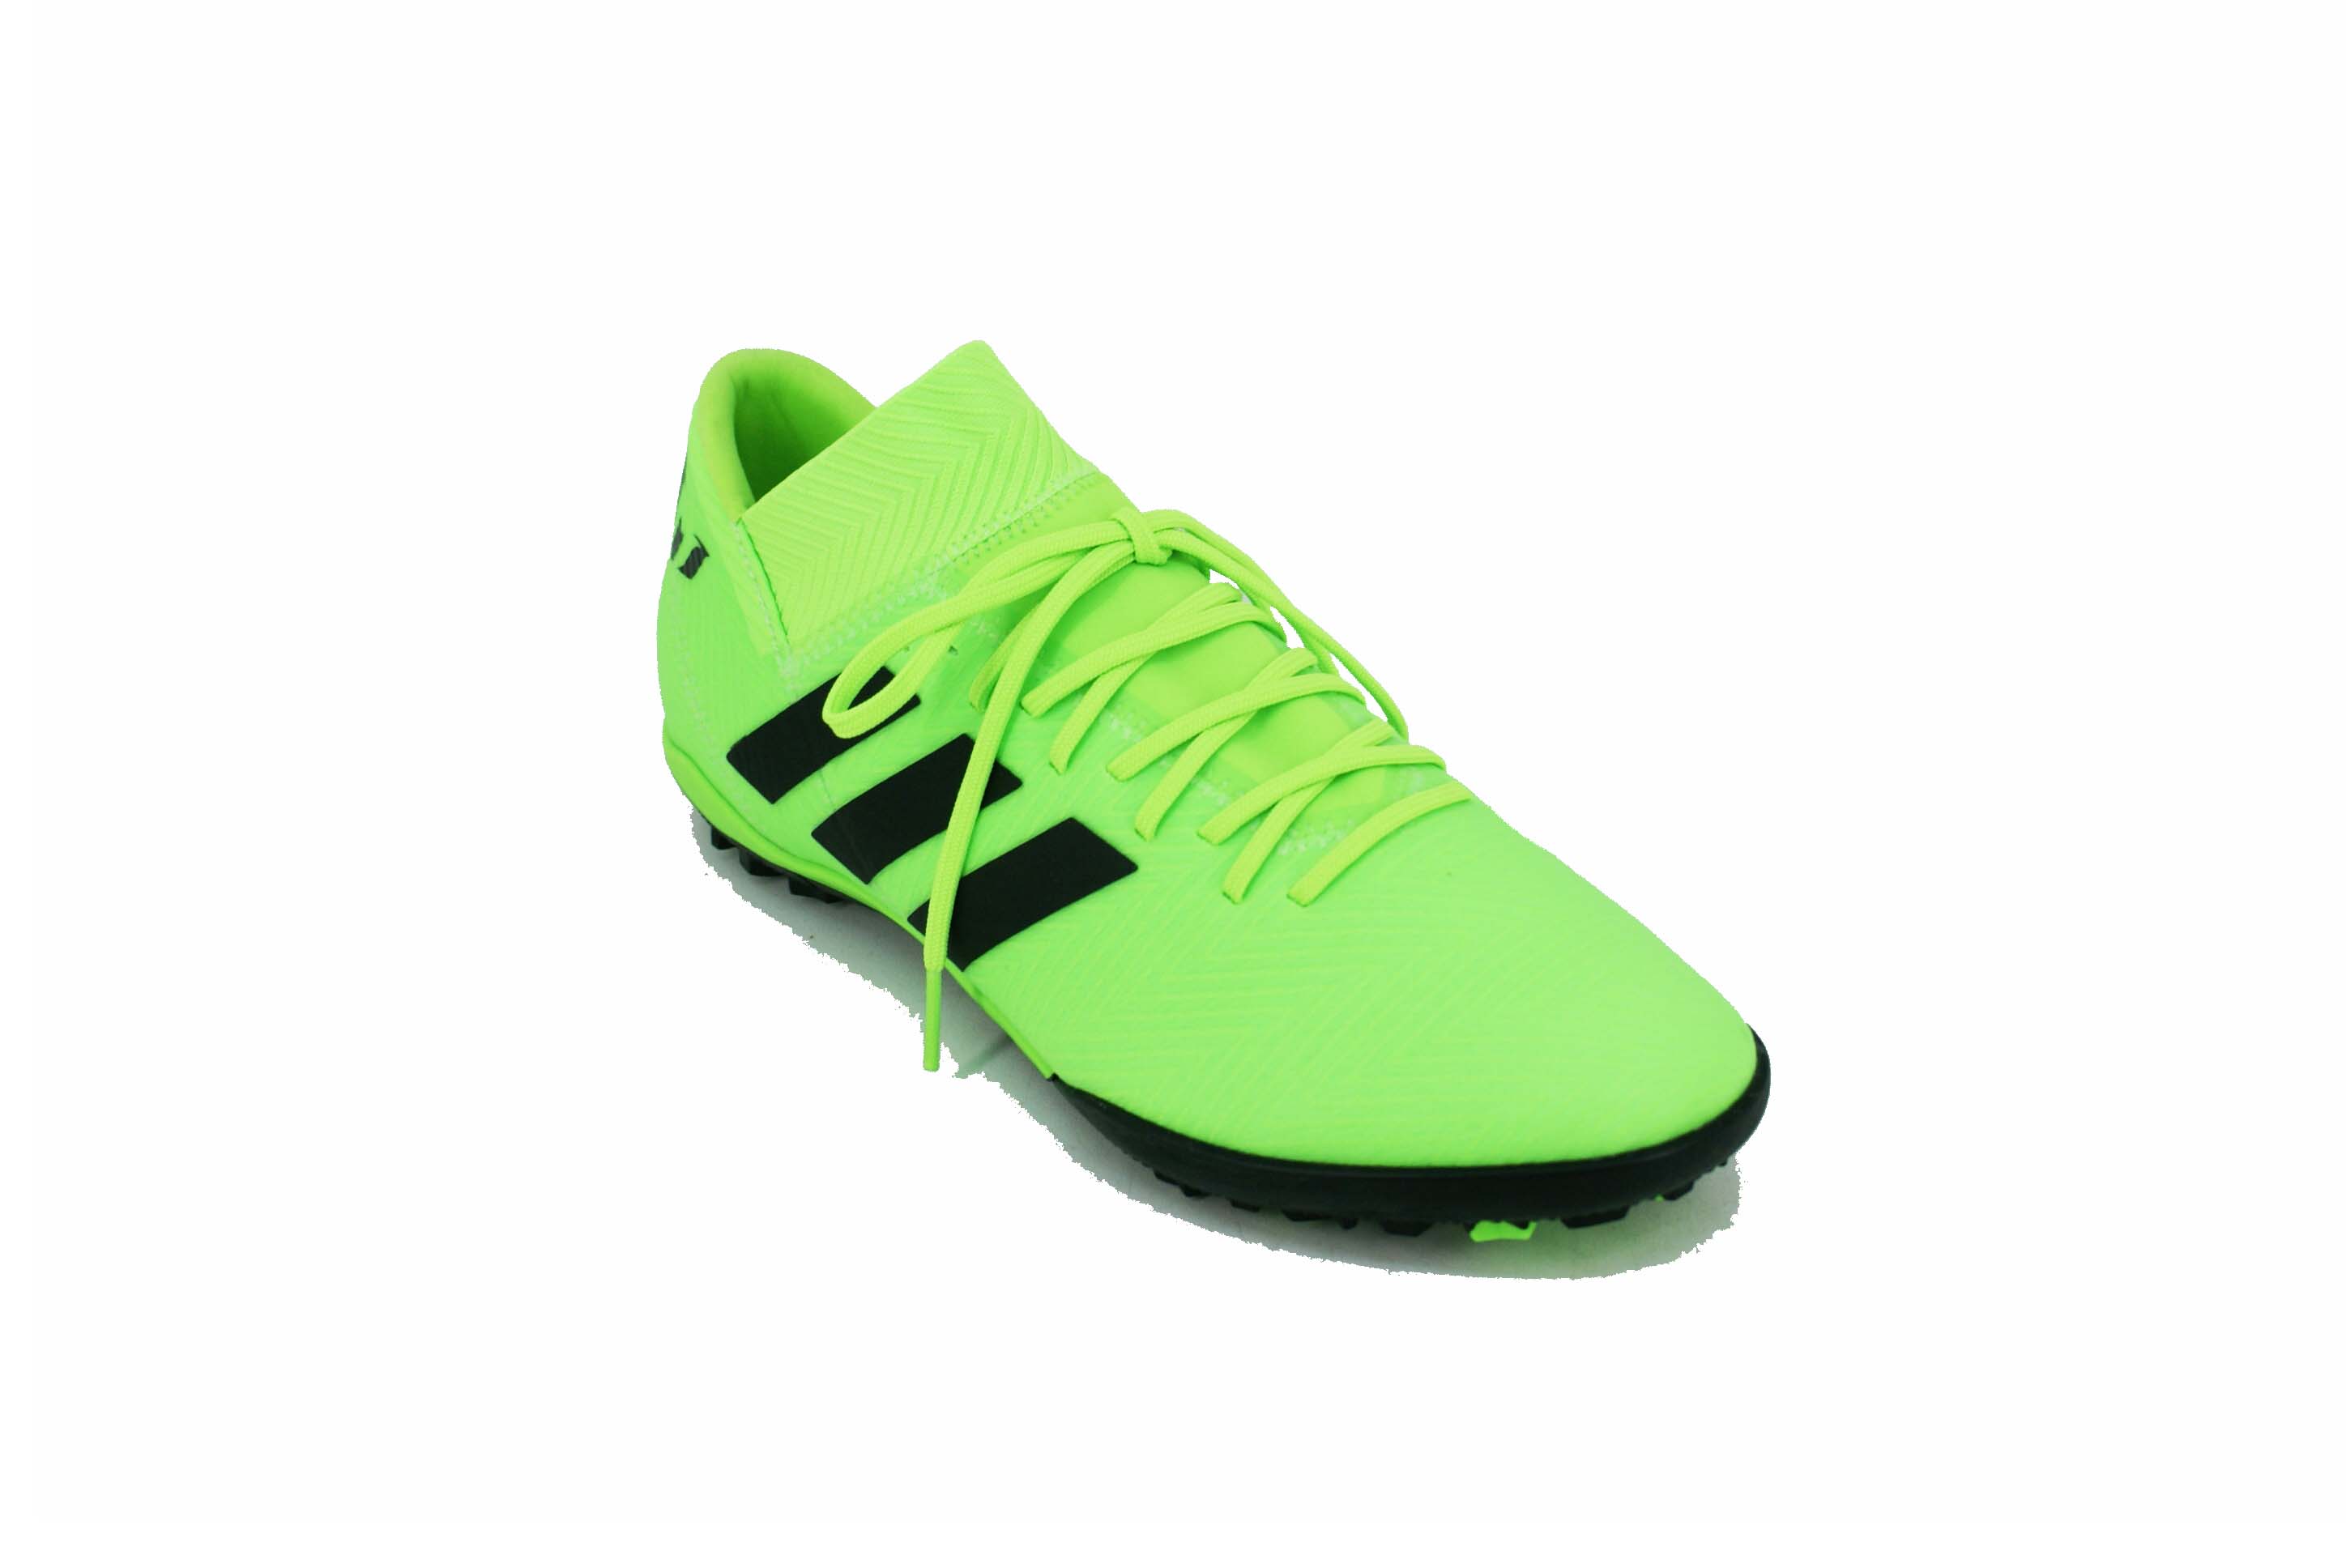 Botines Verdes Clearance, SAVE